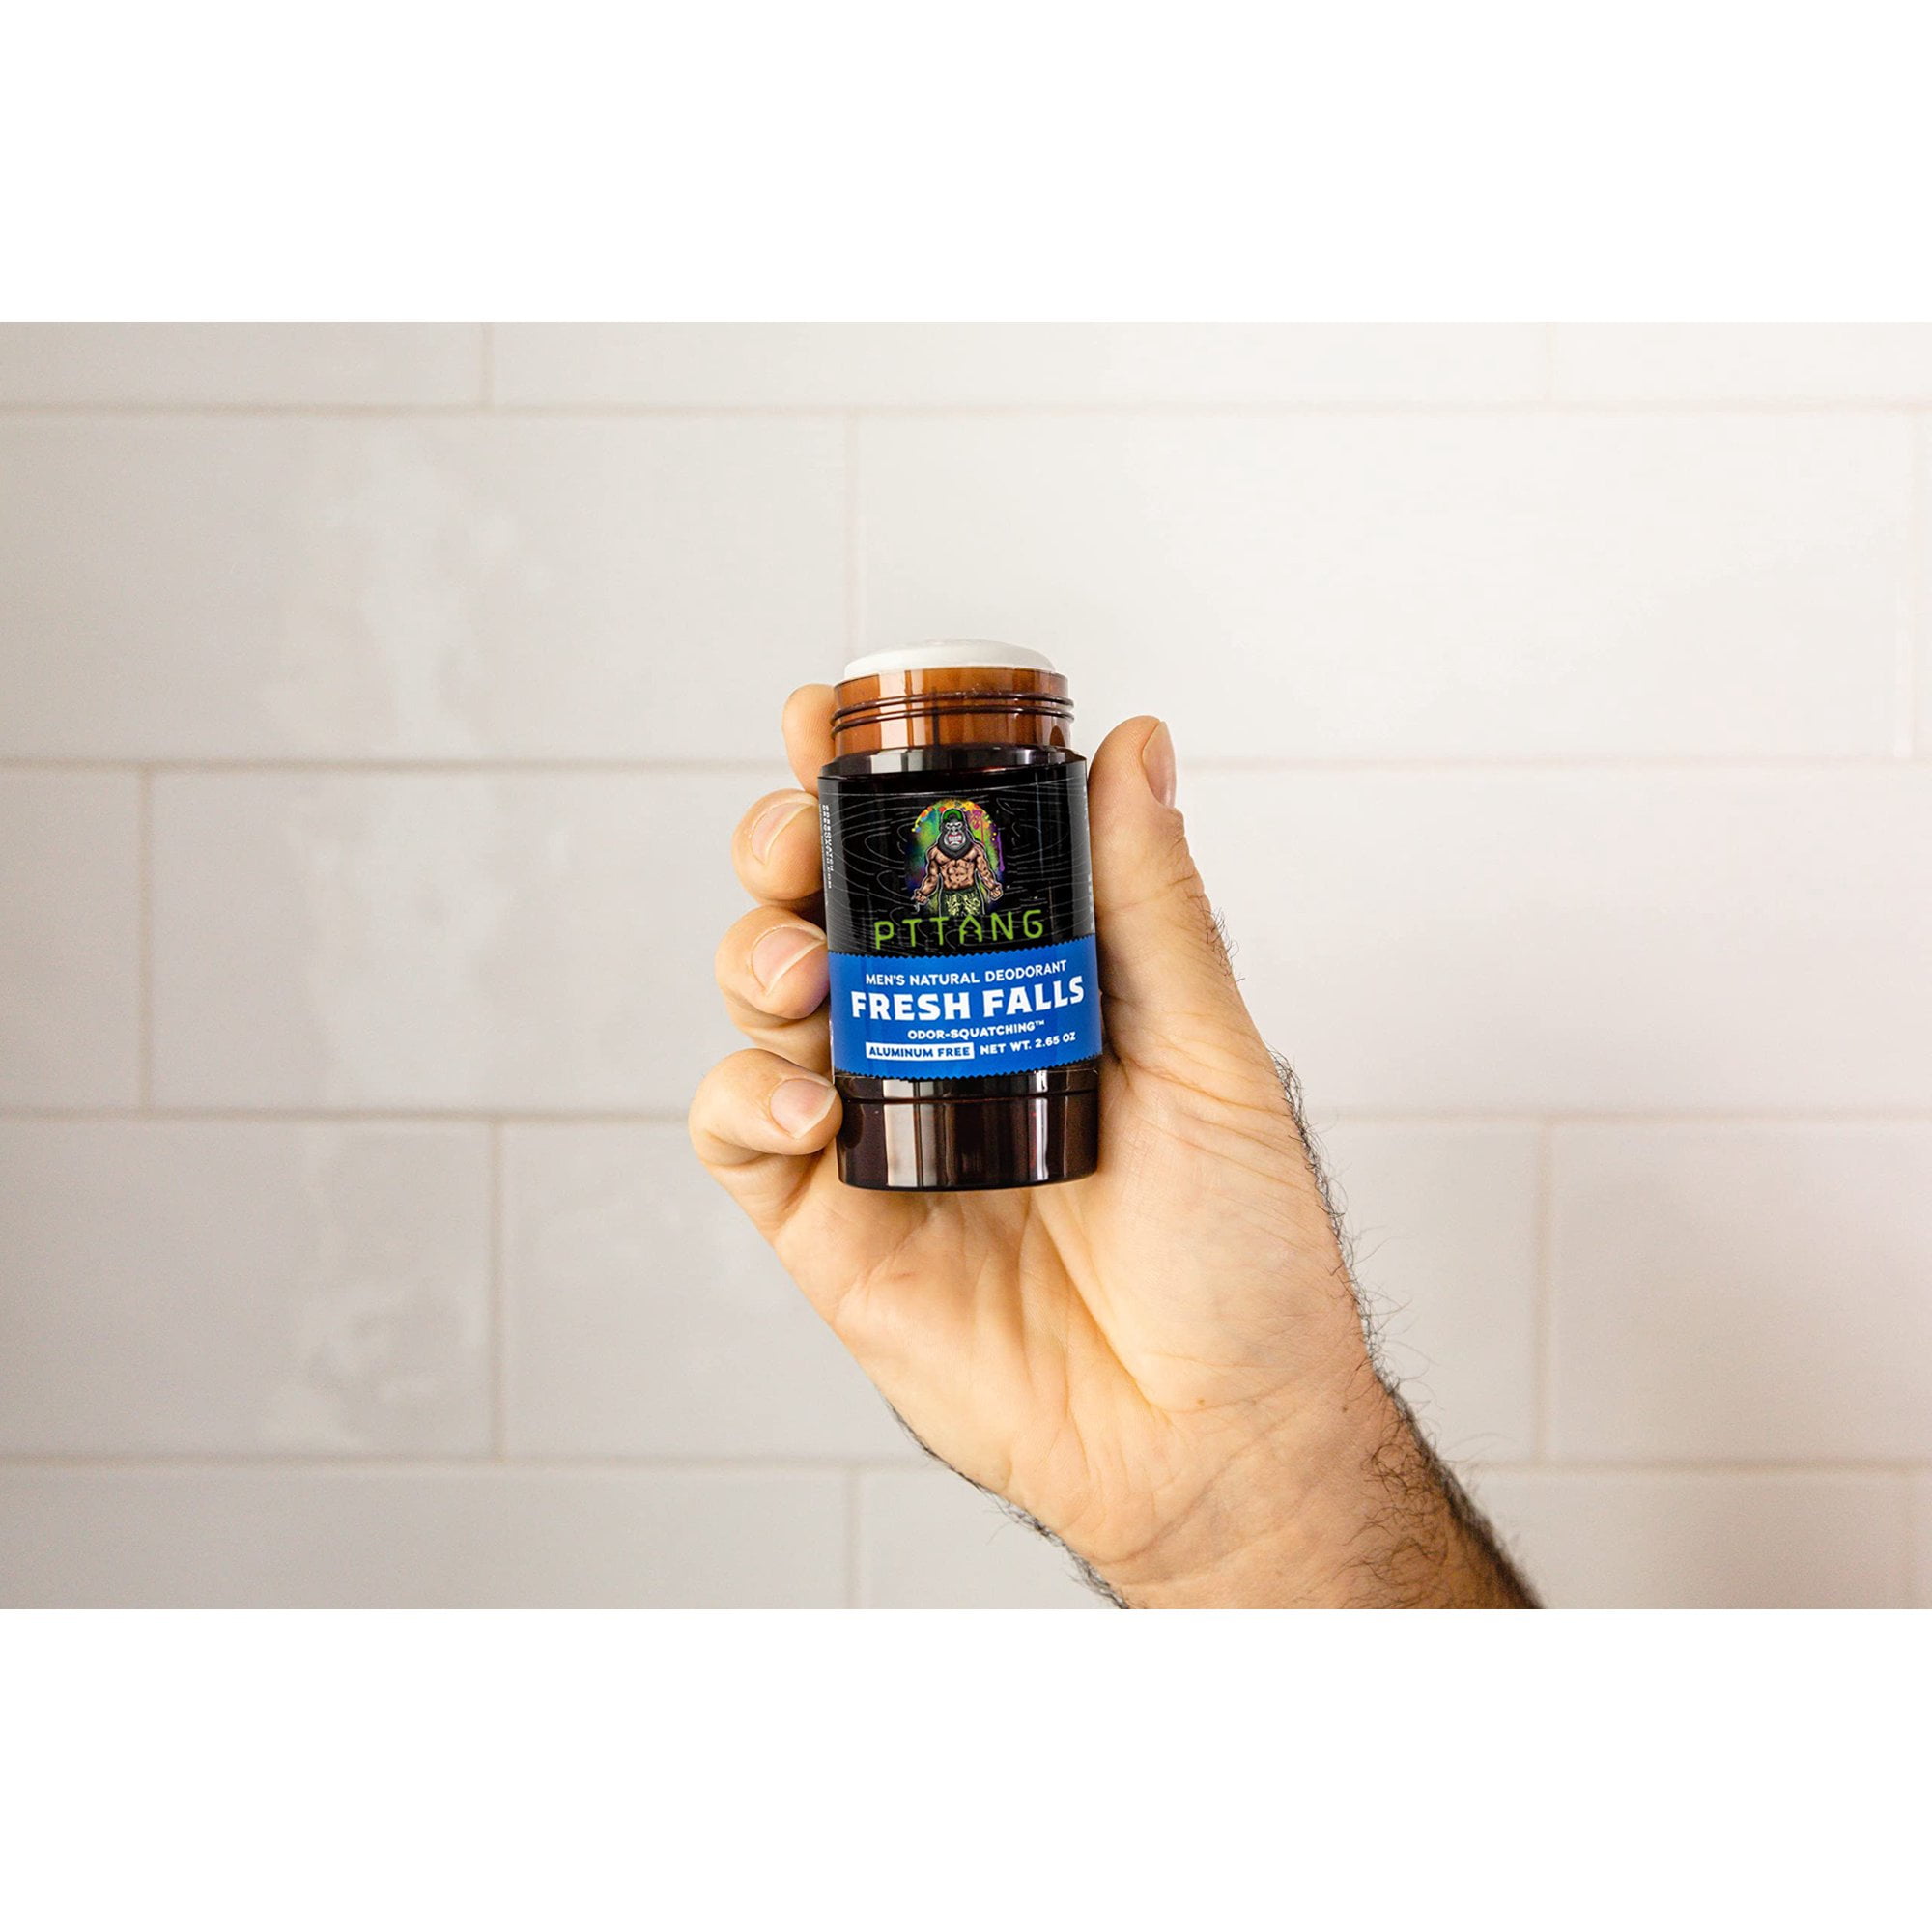 Dr. Squatch's All-Natural Men's Deodorant Is 20% Off - InsideHook